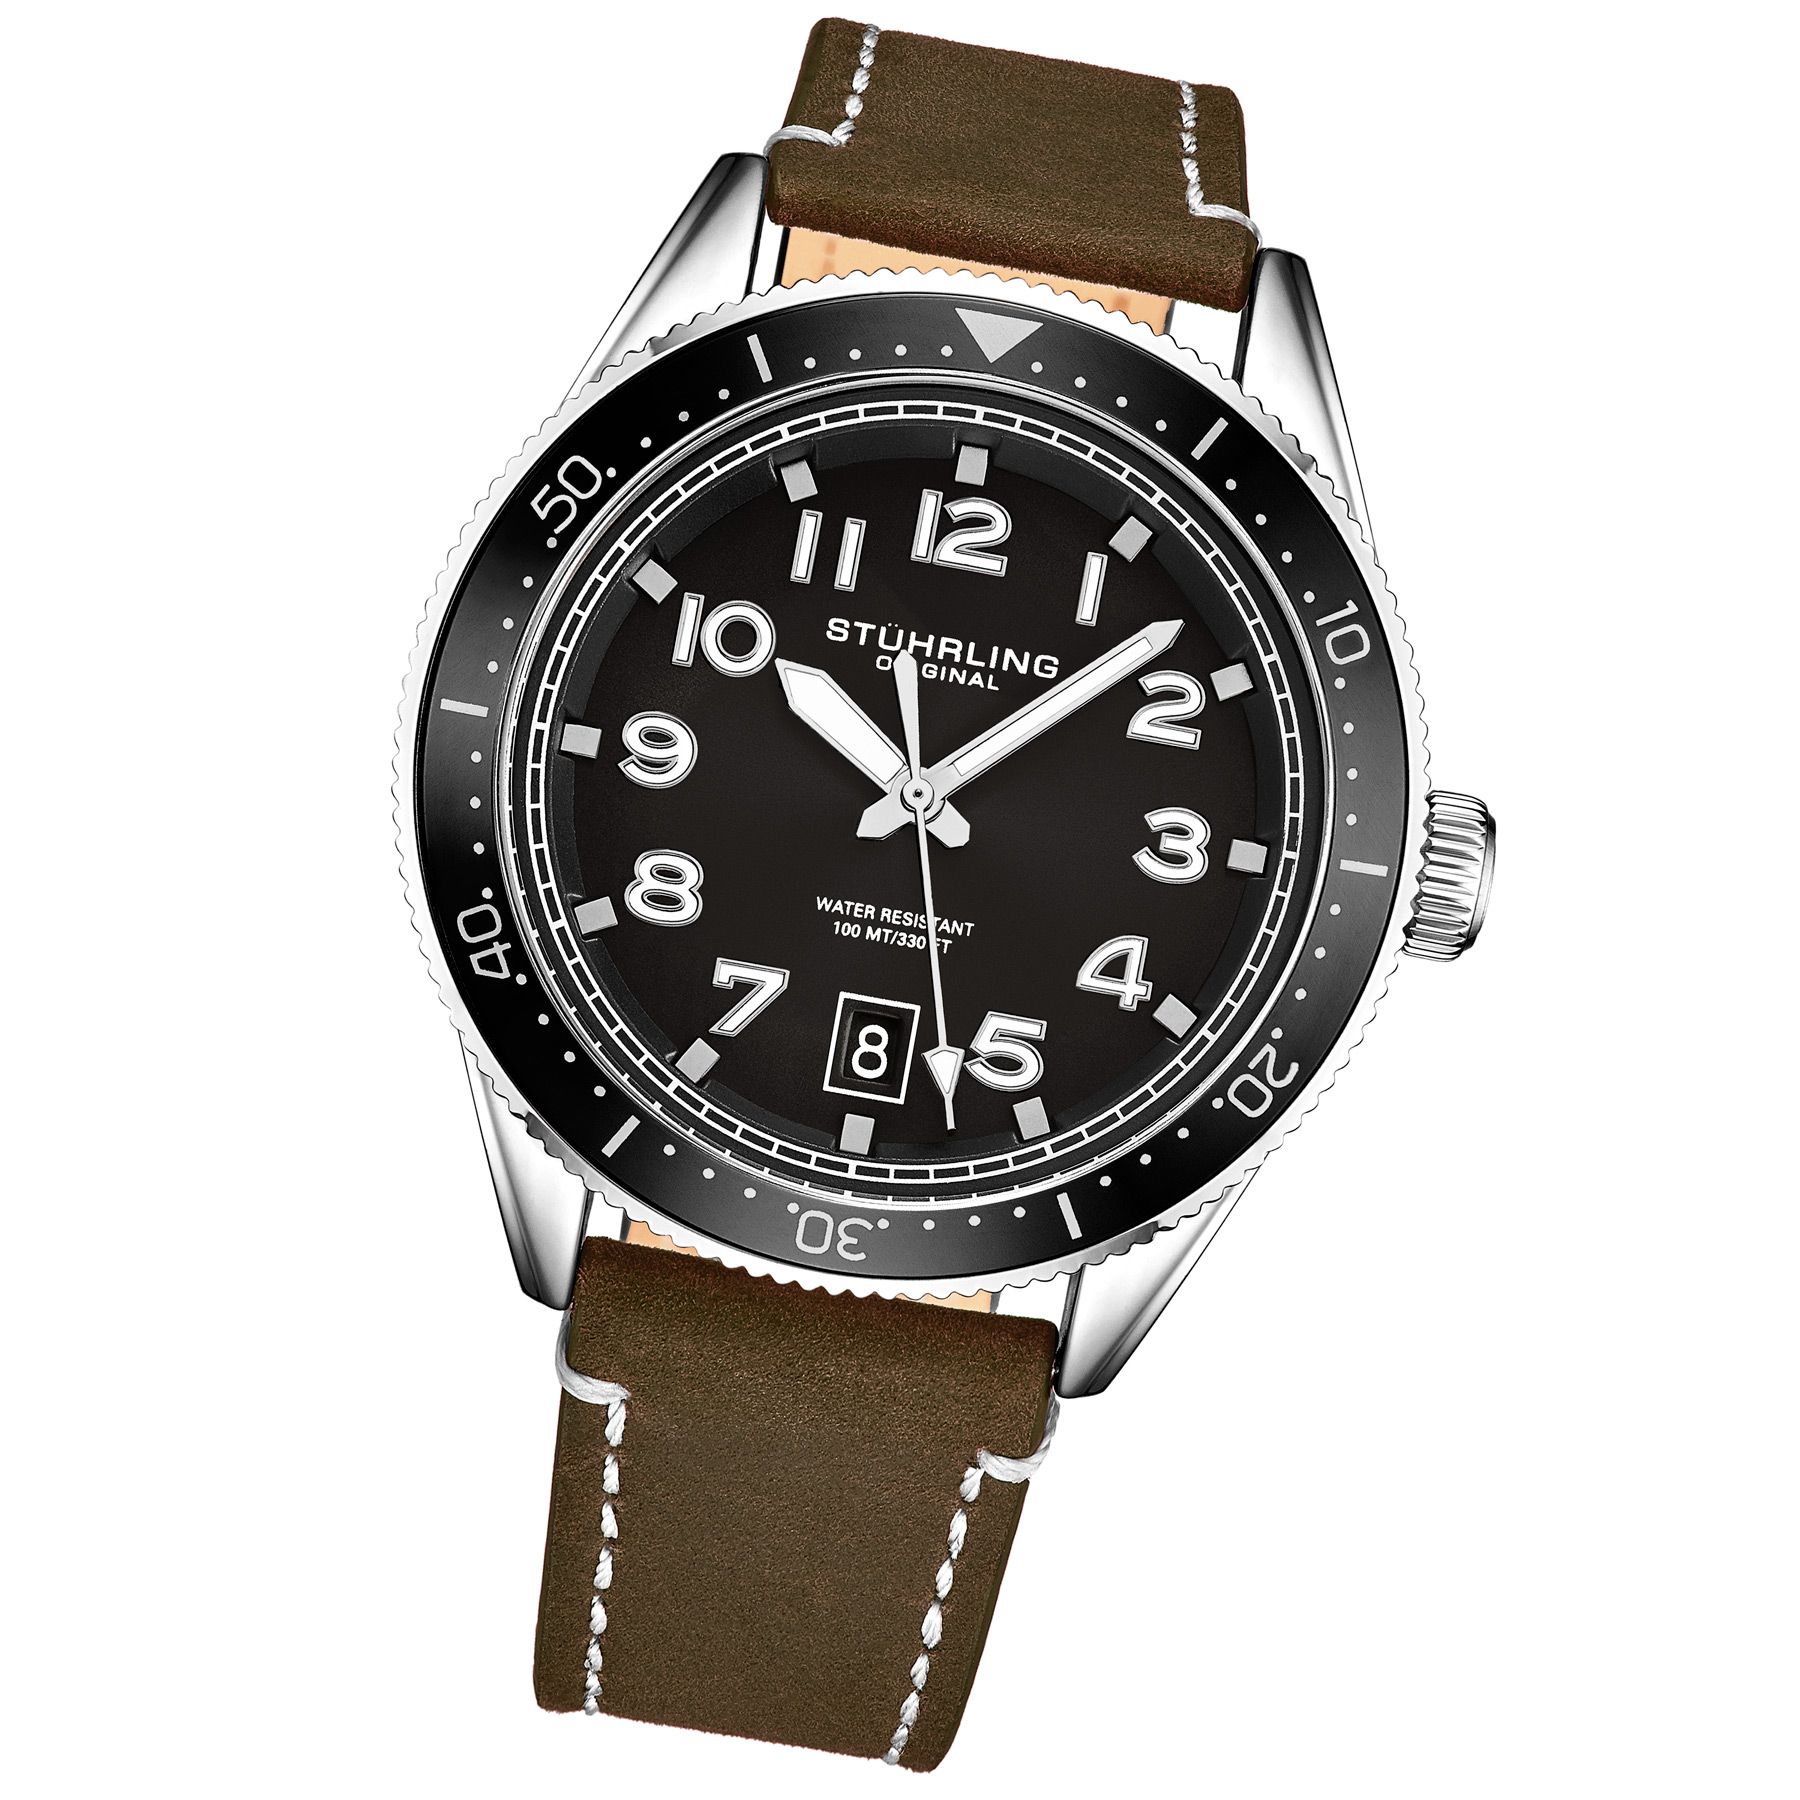 Men's Quartz Silver Case, Black Bezel, Black Dial, Luminous Silver Hands and Markers, Brown Leather Strap with White Contrast Stitching Watch